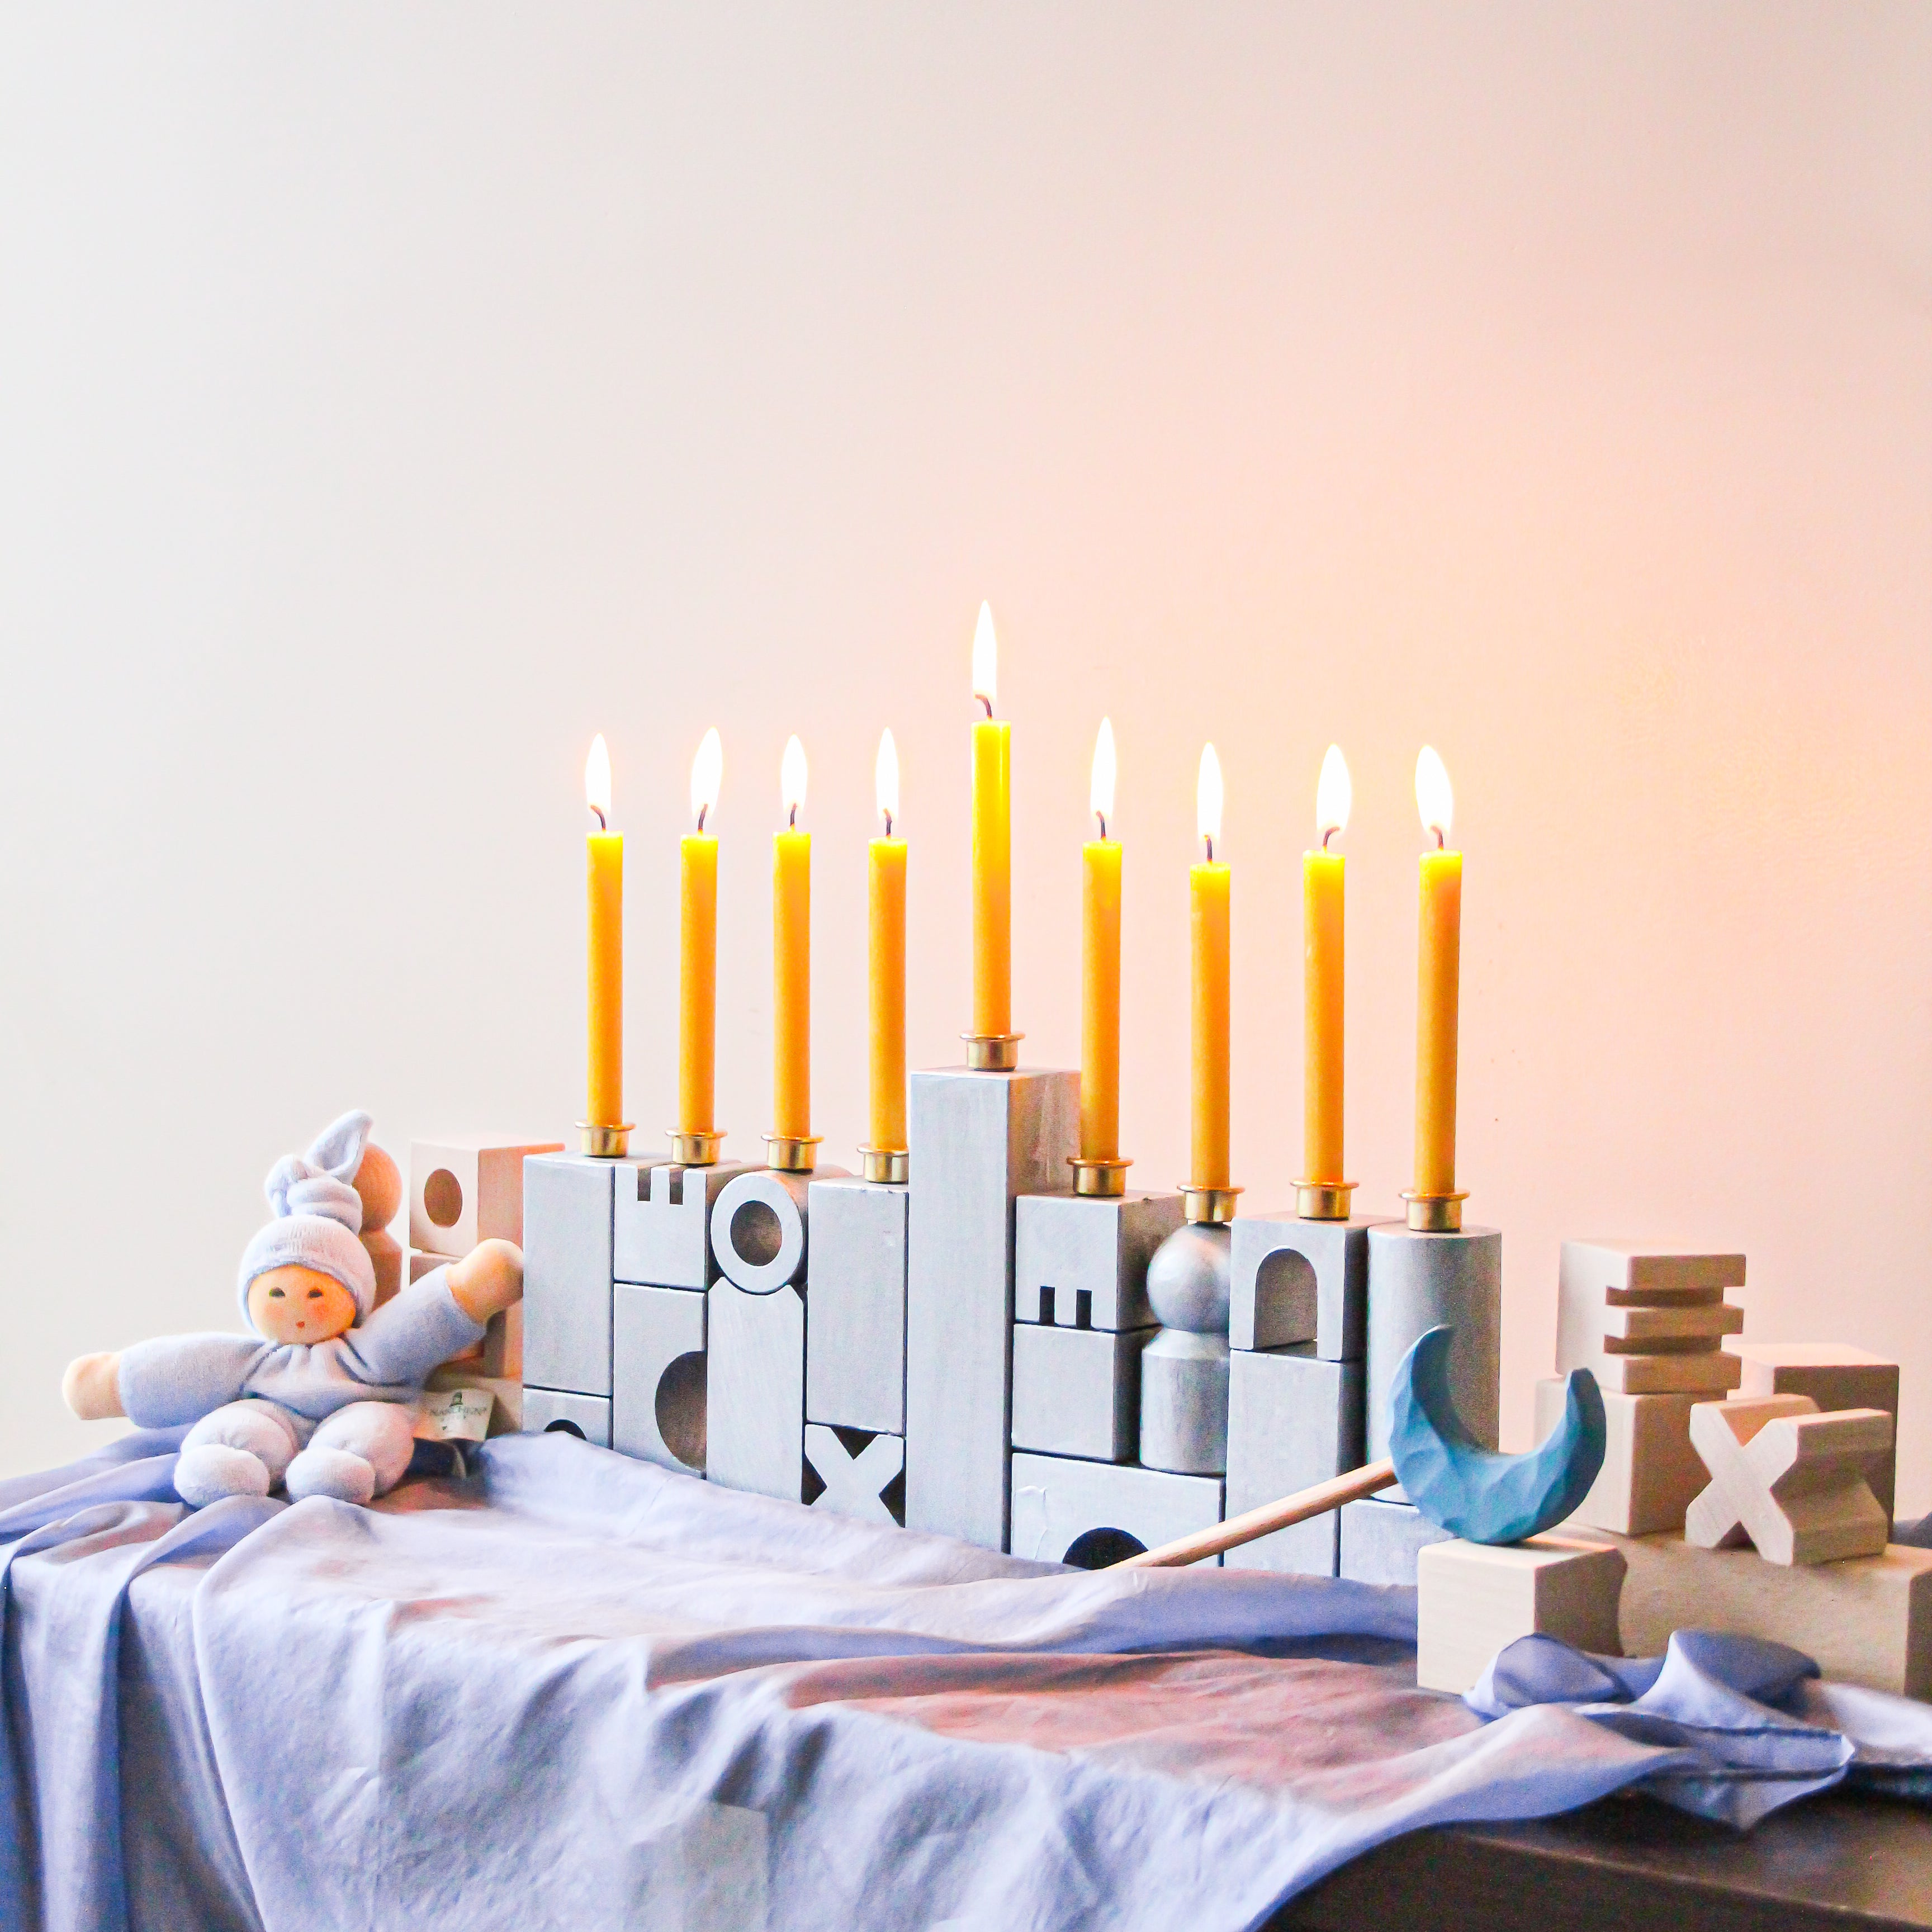 A menorah made of HABA blocks sits on a blue playsilk with lit candles.